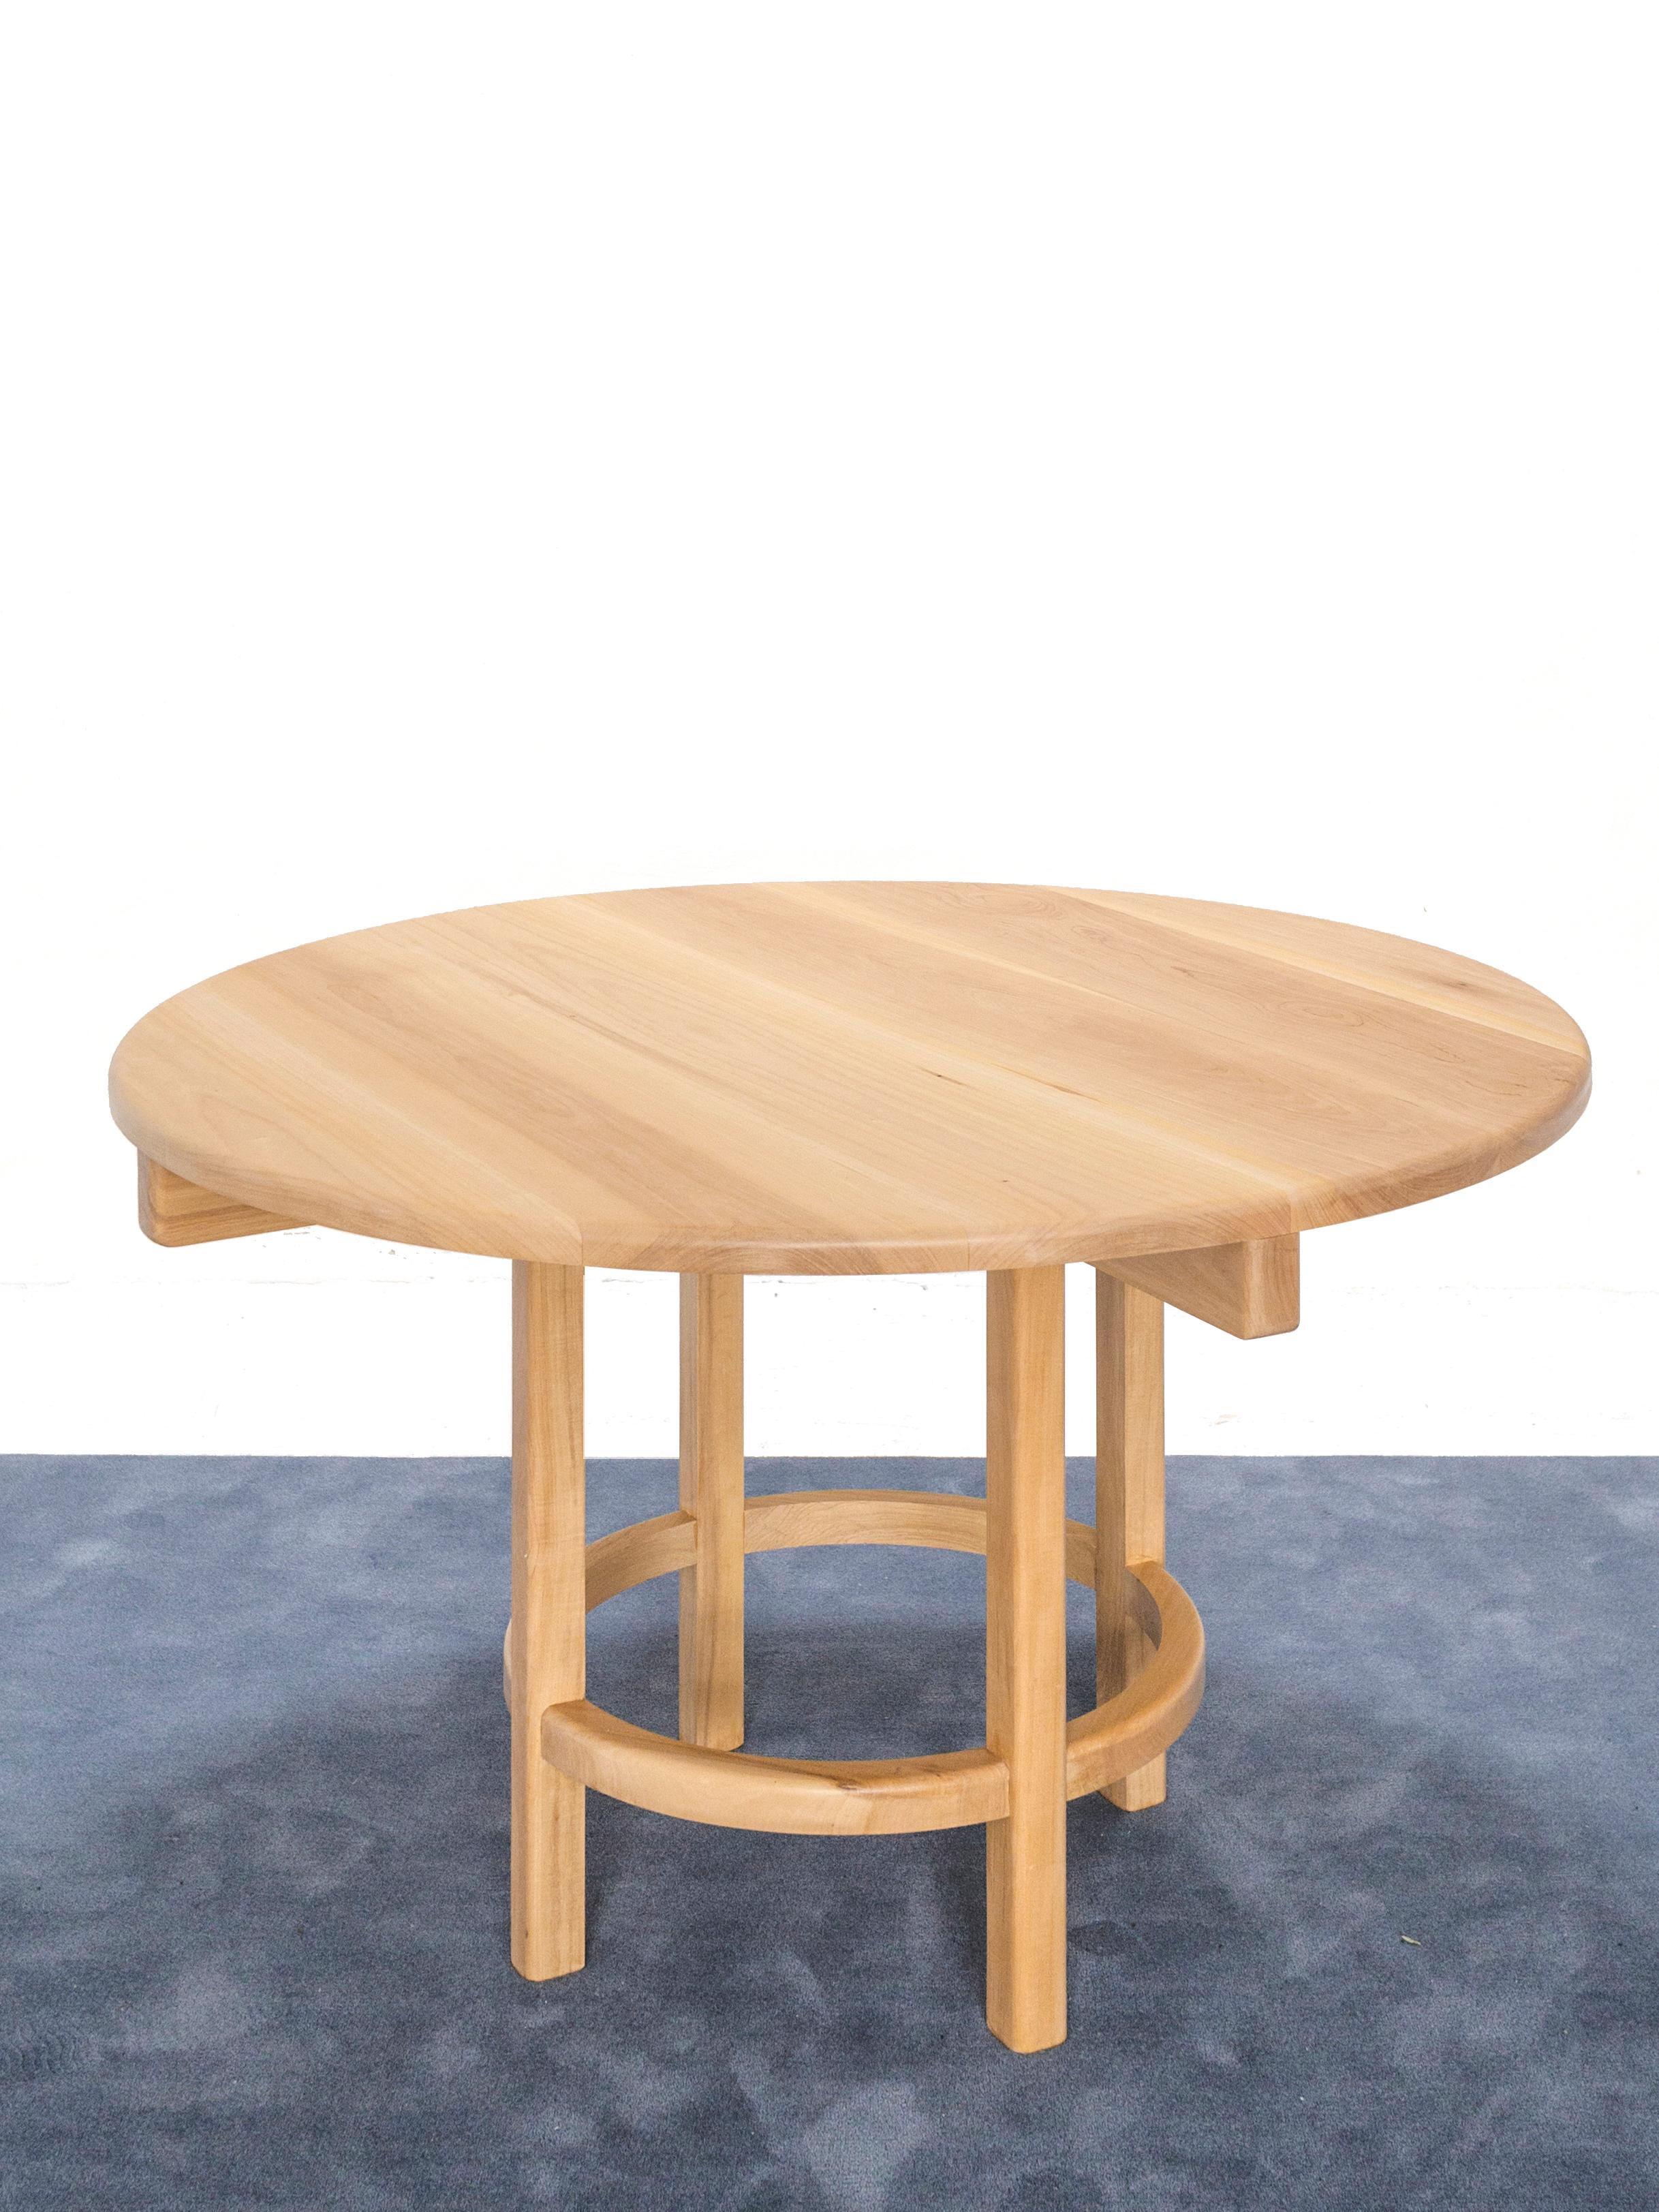 Argentine Orno Round Dining Table by Ries For Sale